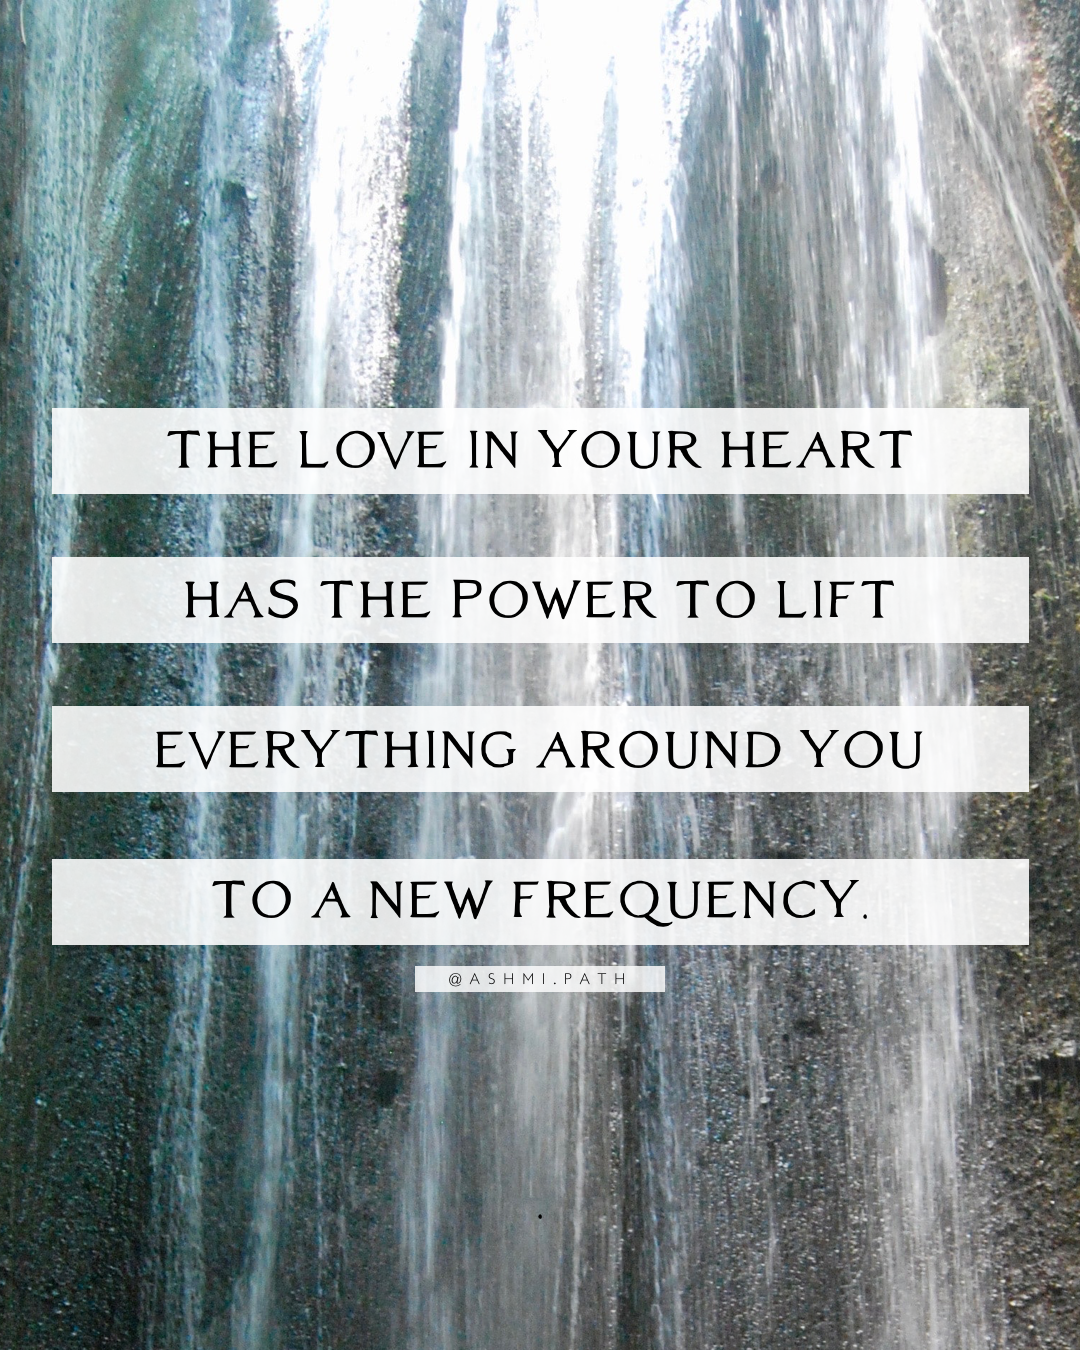 The Power of Your Heart